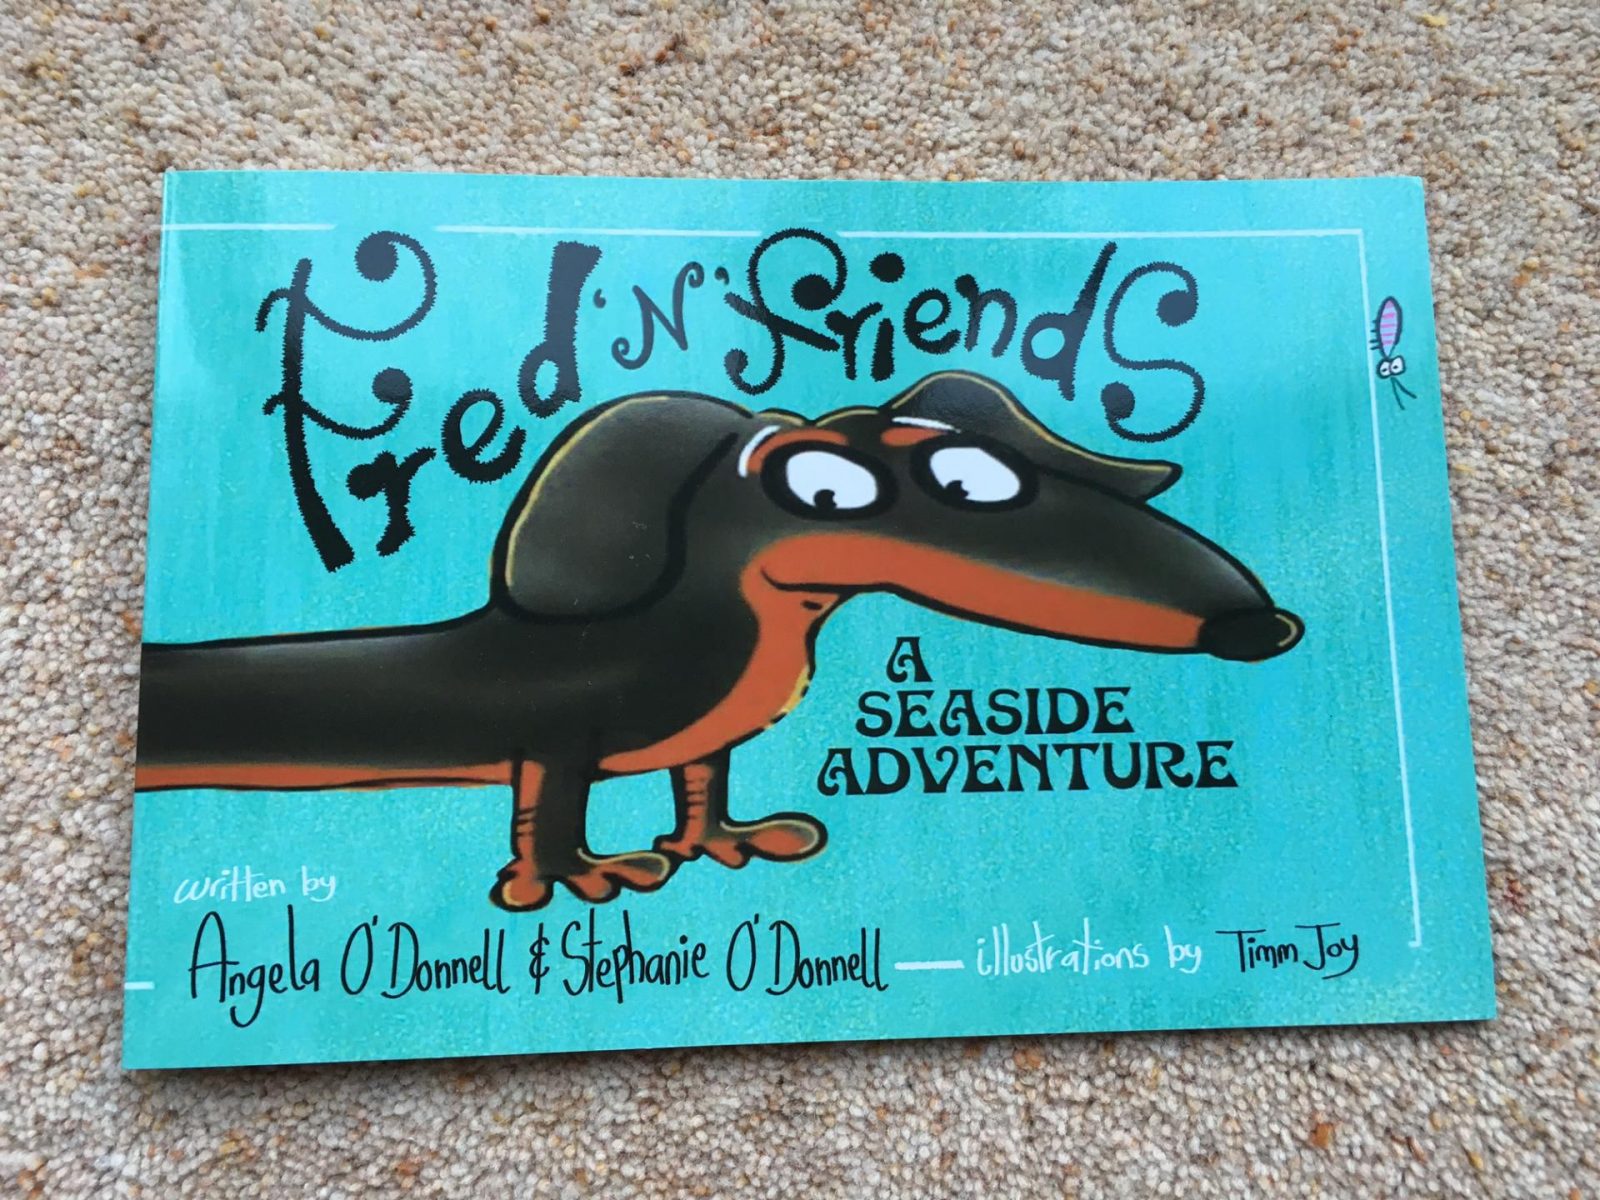 Fred ‘n’ Friends Book – REVIEW